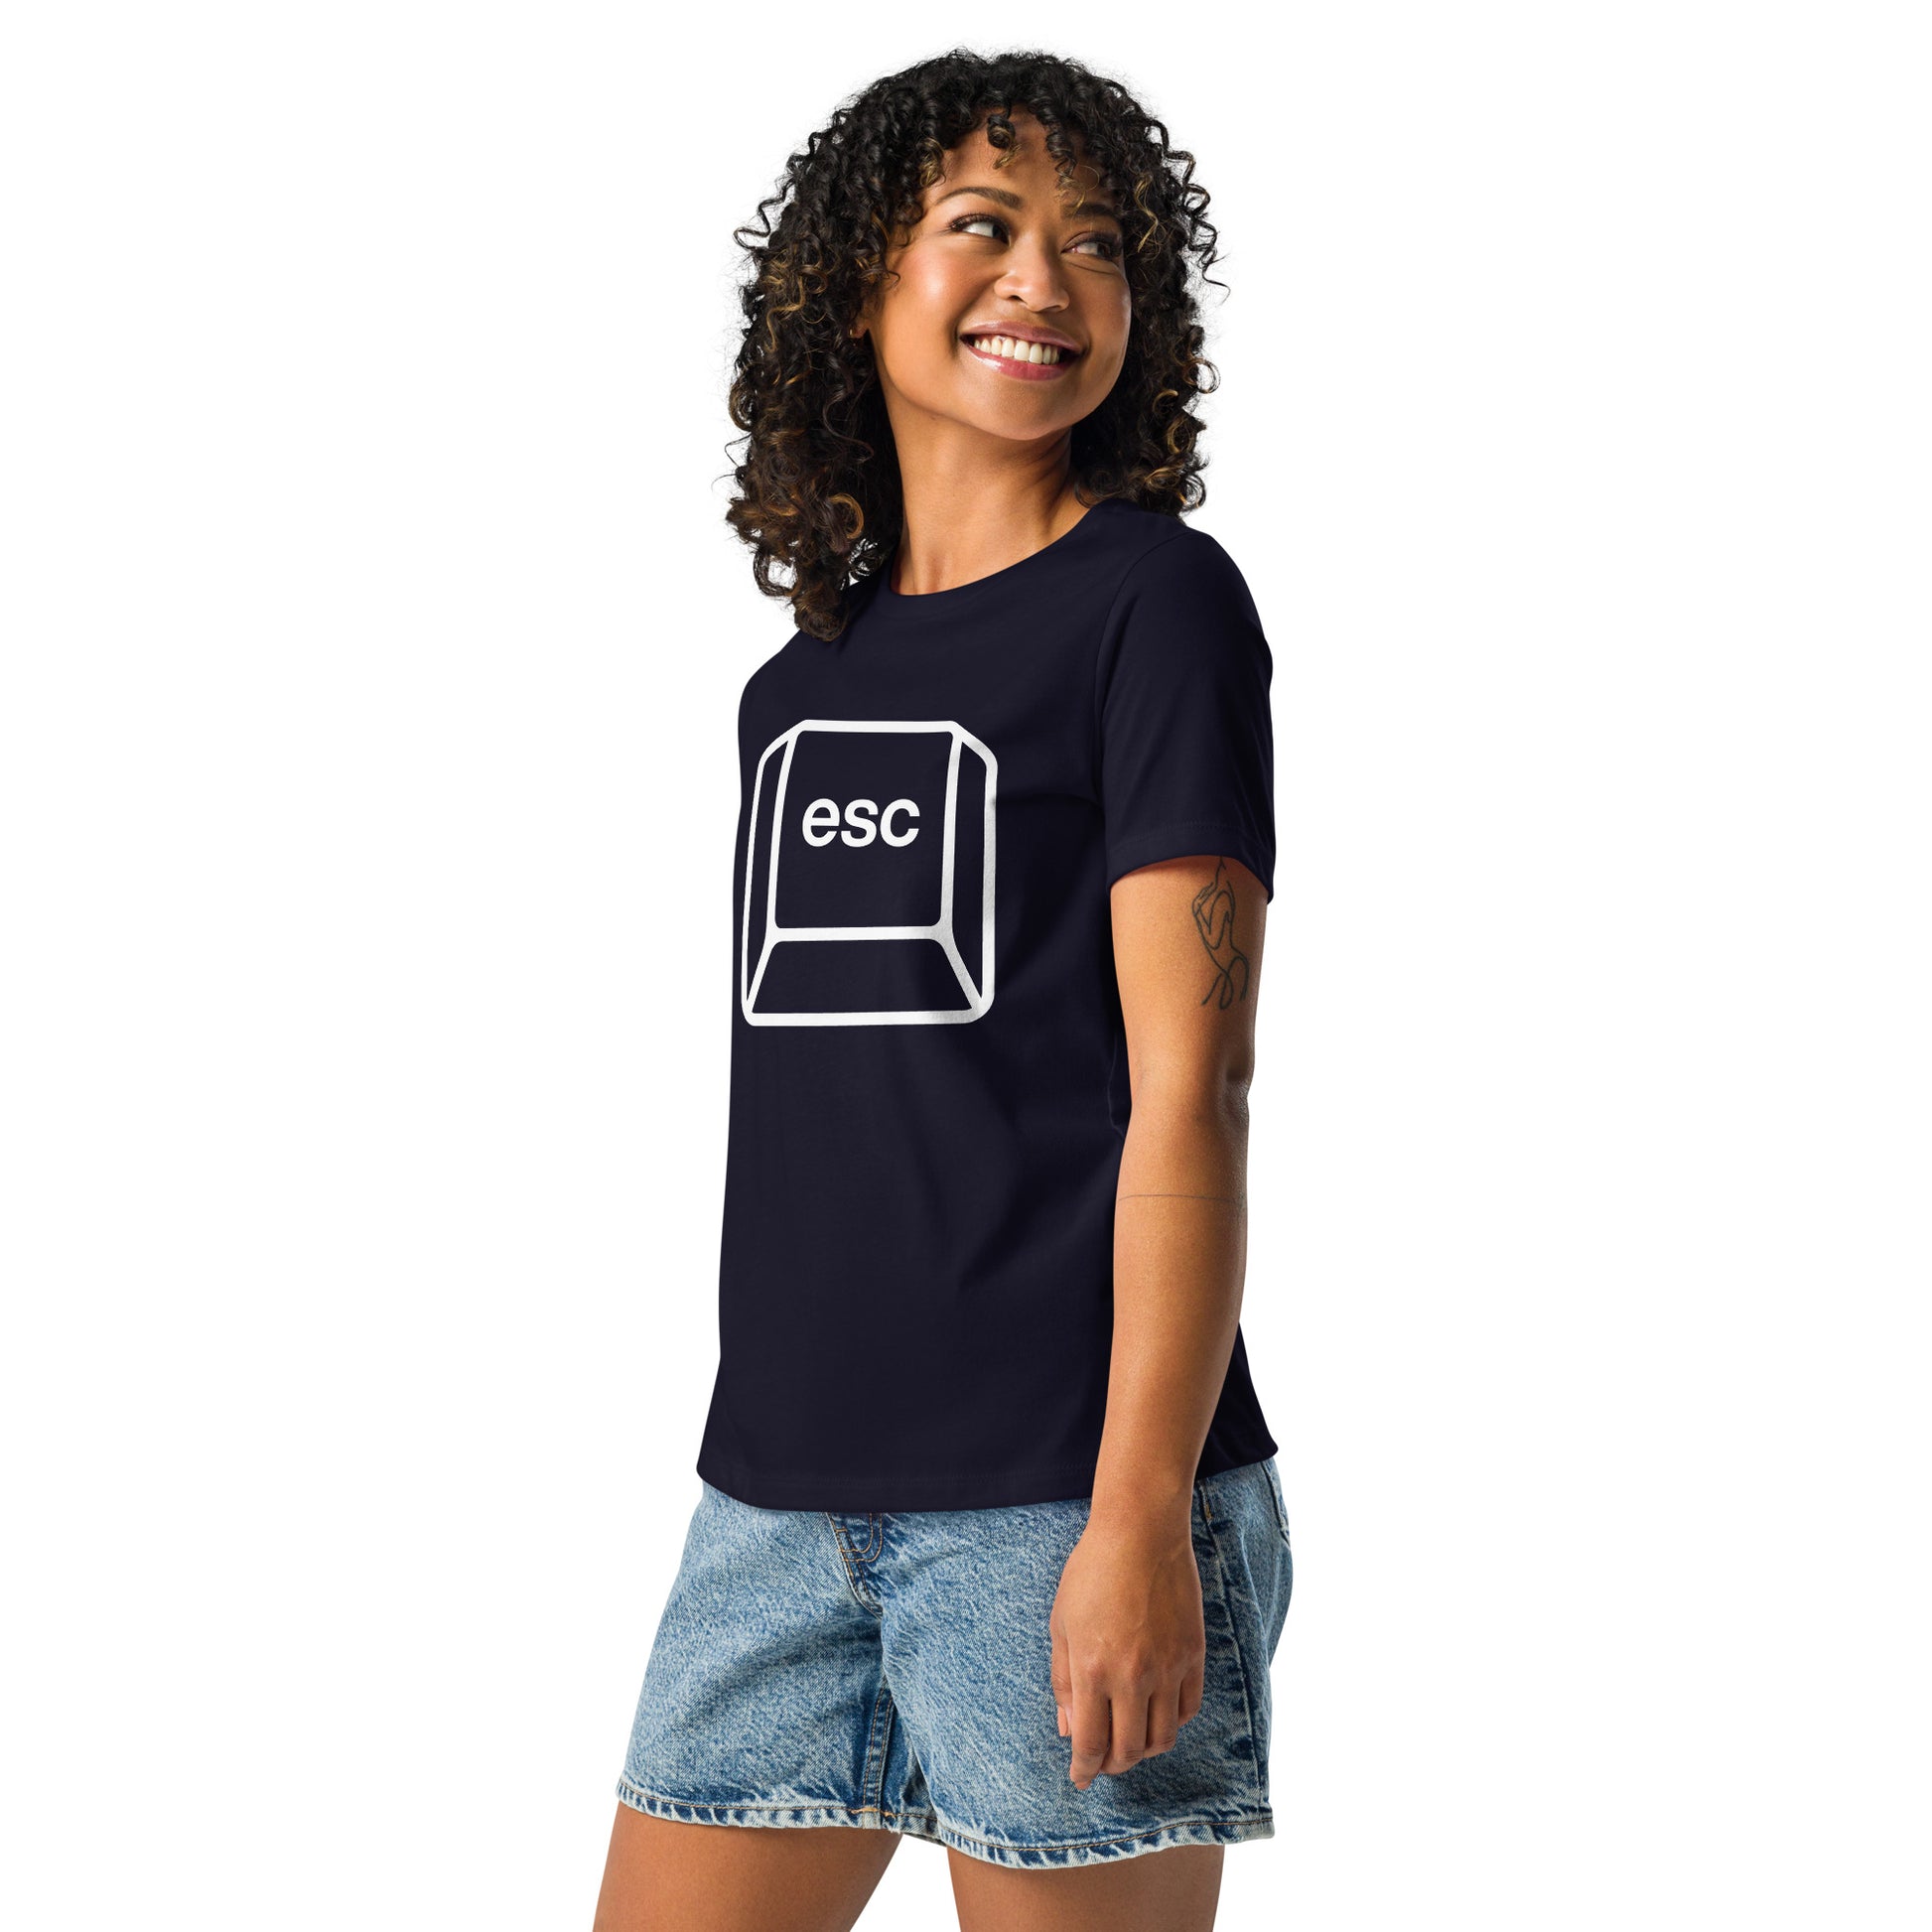 Woman with navy blue t-shirt with picture of esc key